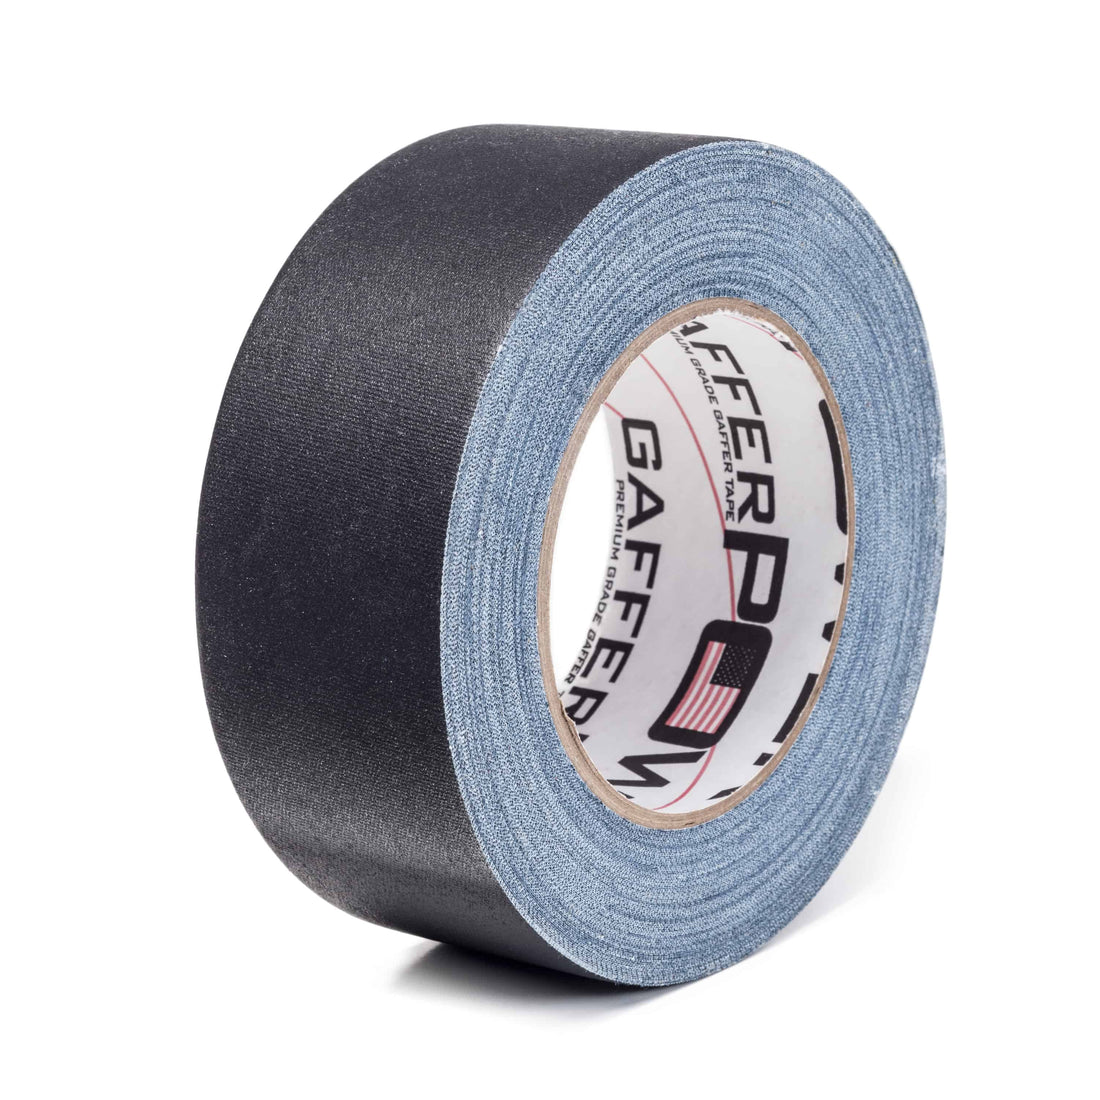 Top 7 Reasons Gaffer Tape is the Best (We Think)